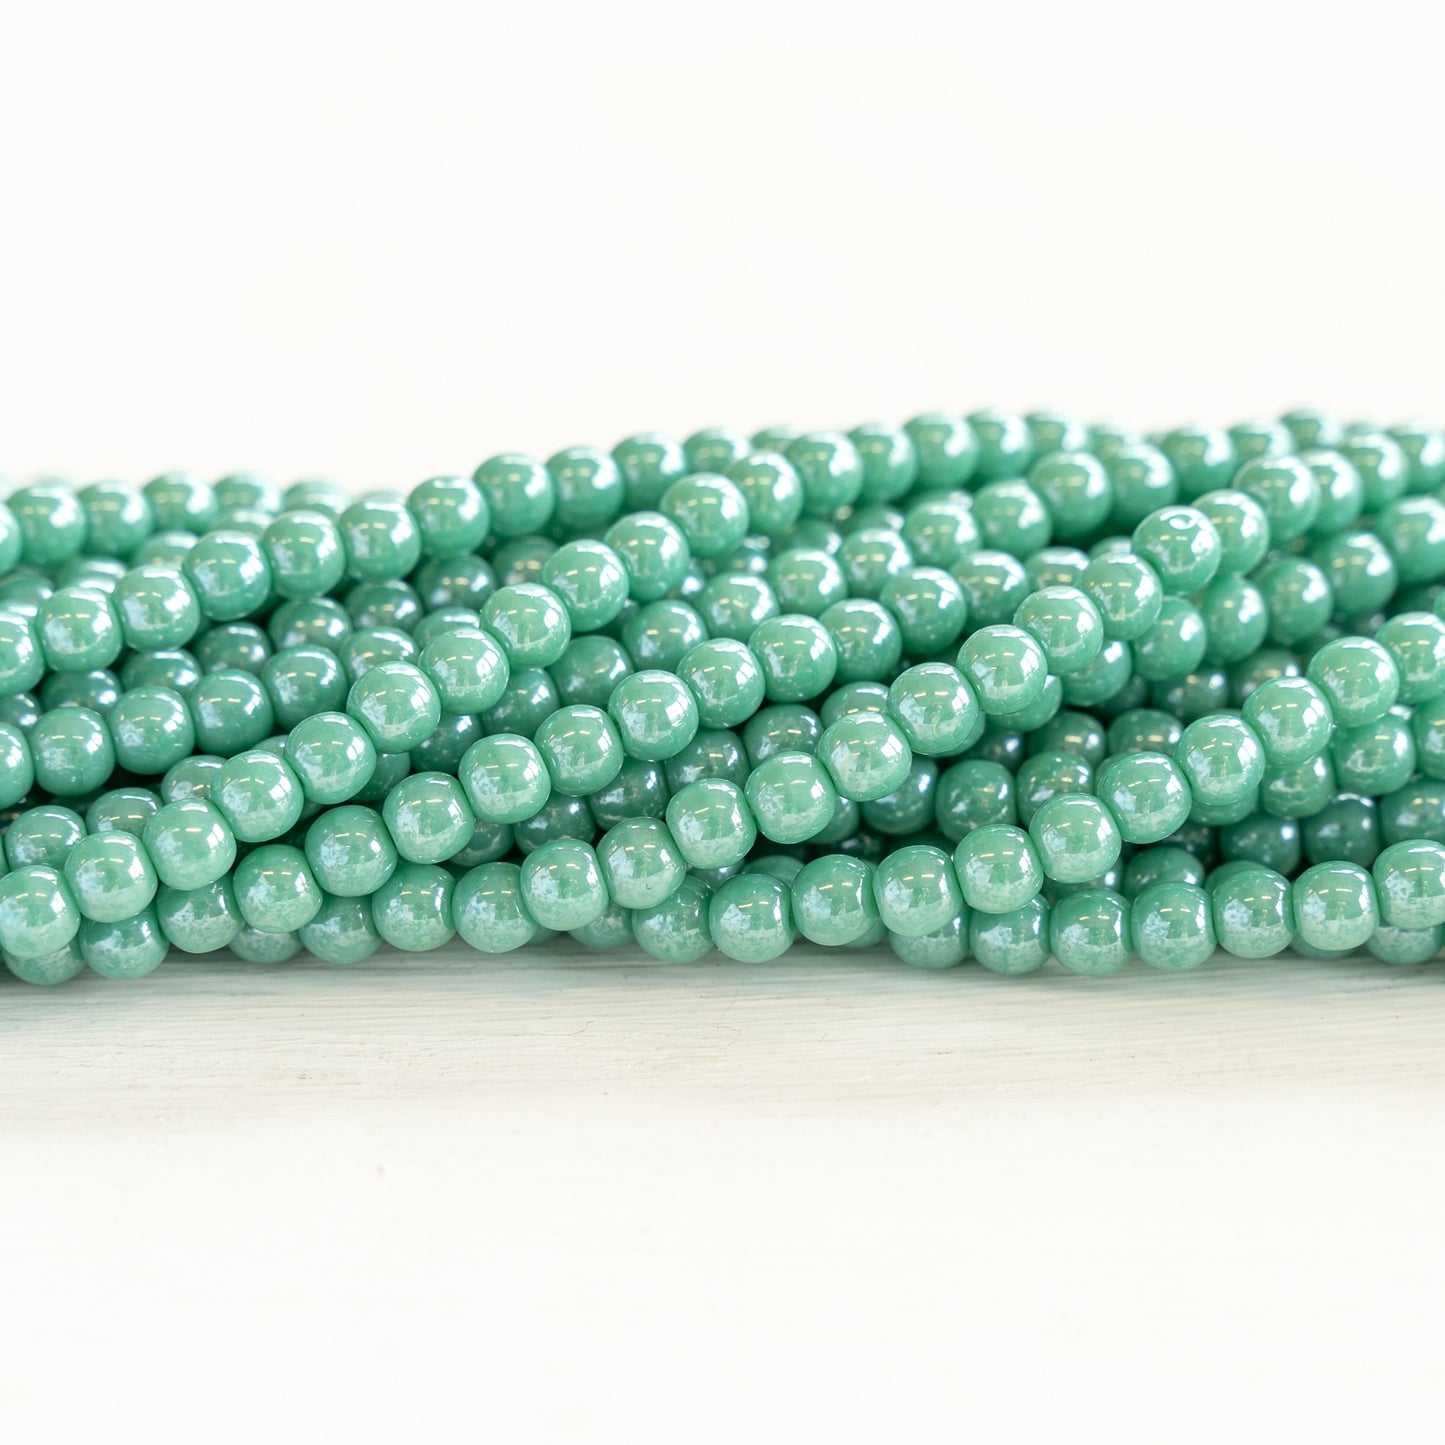 4mm Round Glass Beads - Opaque Turquoise Luster - 100 Beads